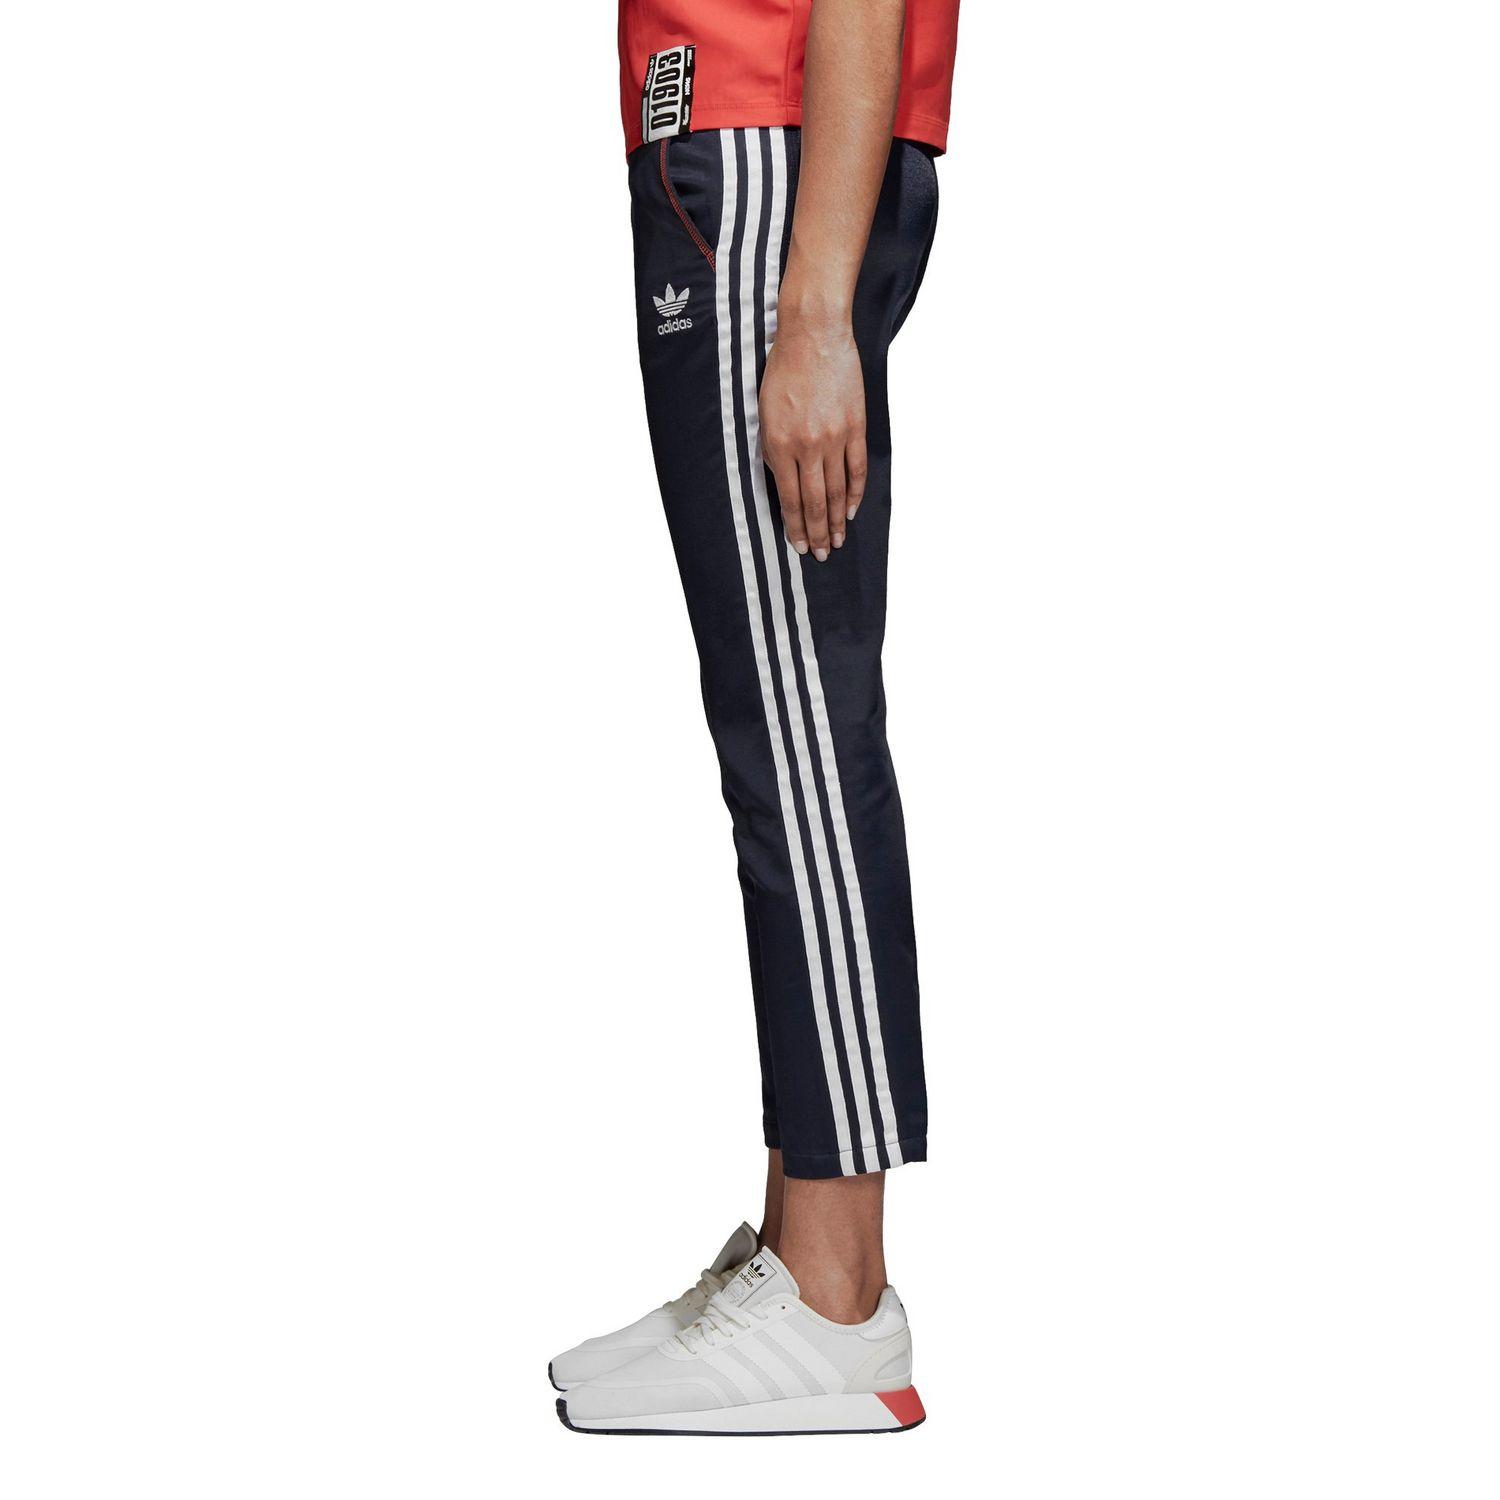 active icons track pants